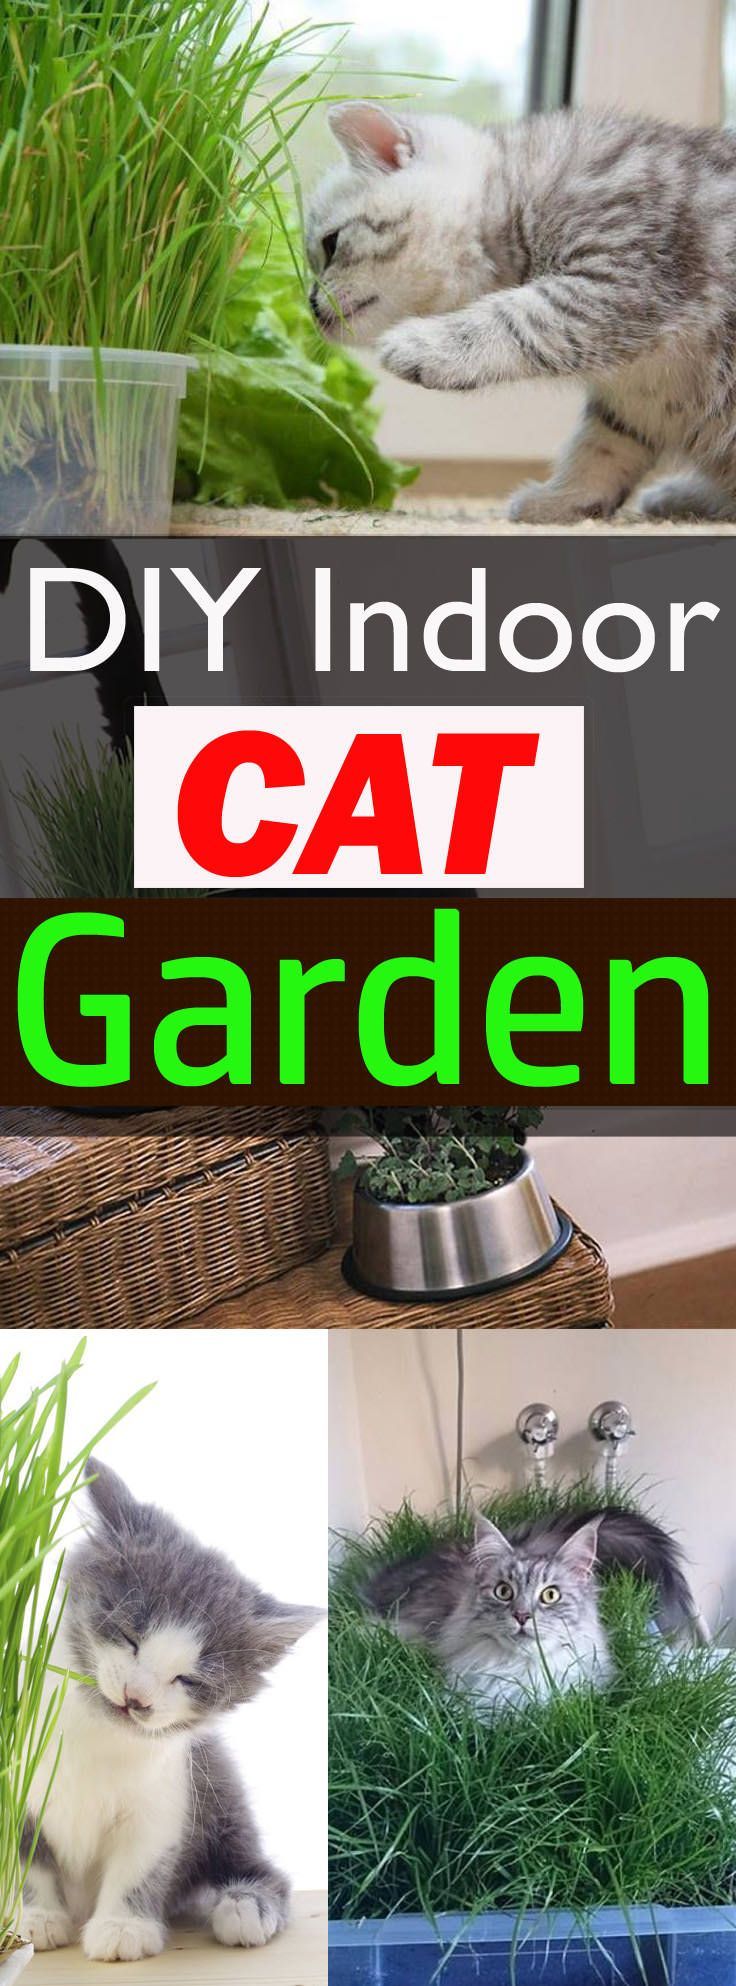 If you love your cat, it’s a good idea to make an indoor cat garden for her. Just follow this step by step guide to do this!